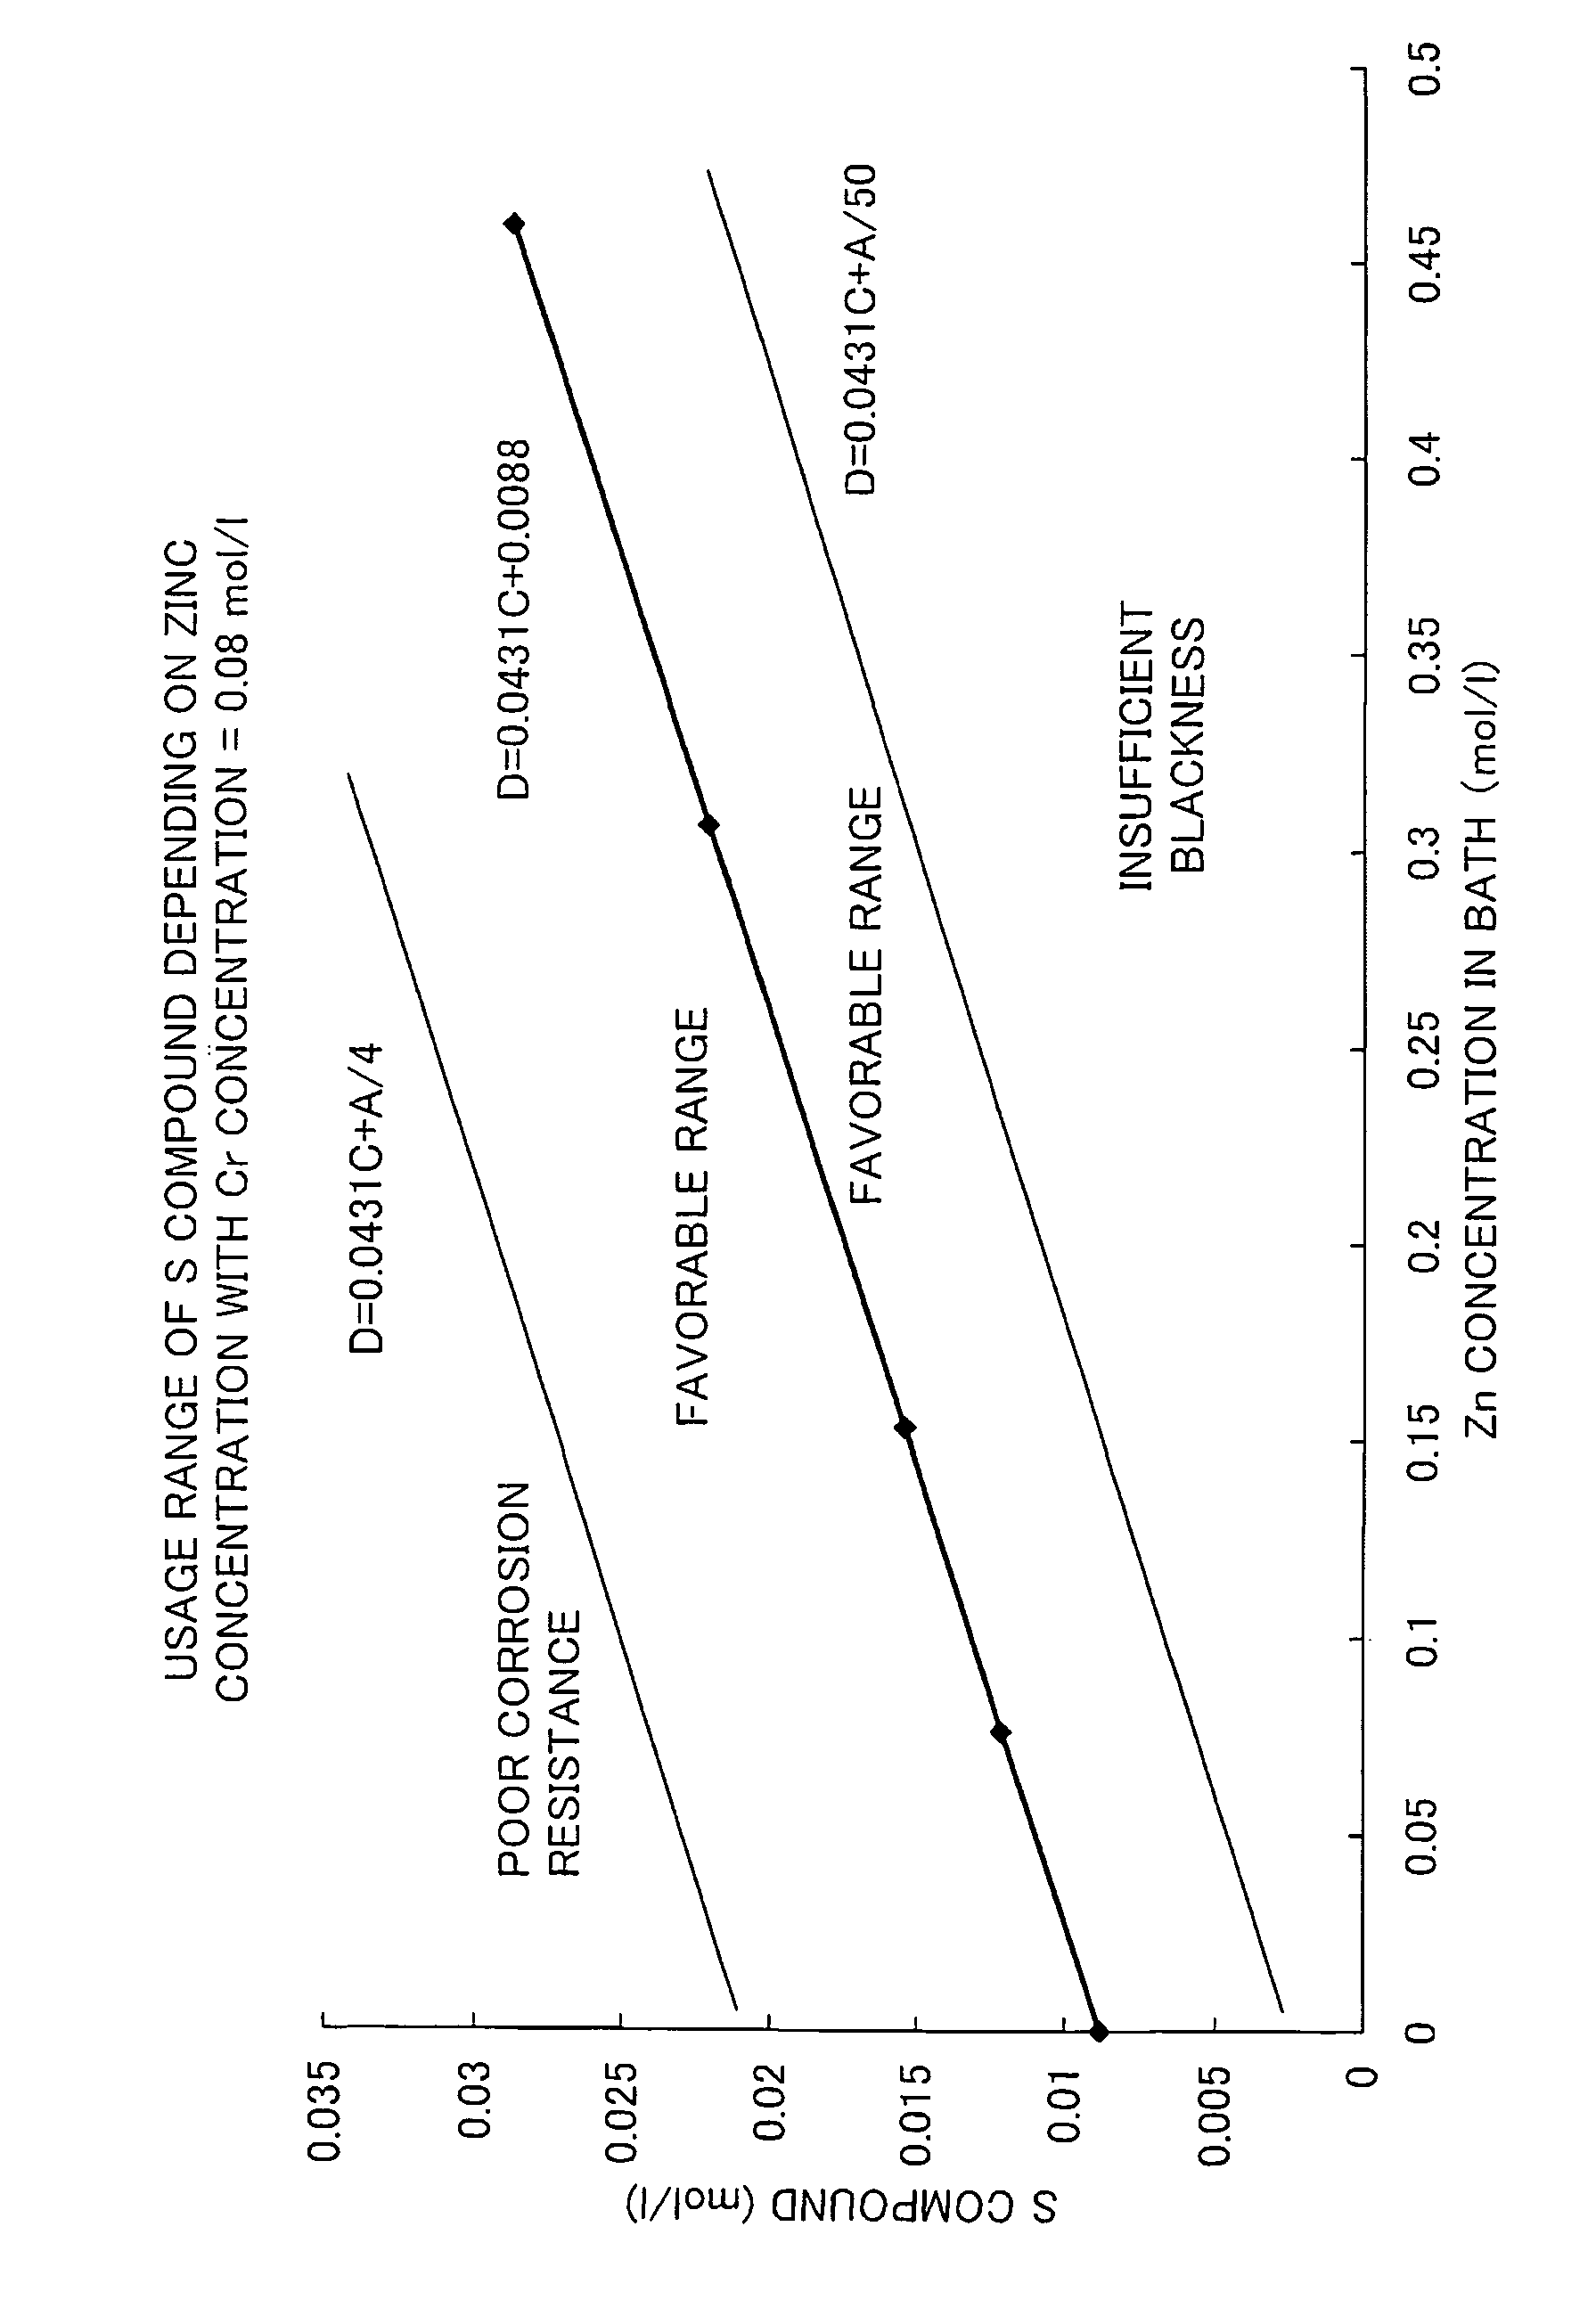 Aqueous treating solution for forming black trivalent-chromium chemical conversion coating on zinc or zinc alloy and method of forming black trivalent-chromium chemical conversion coating